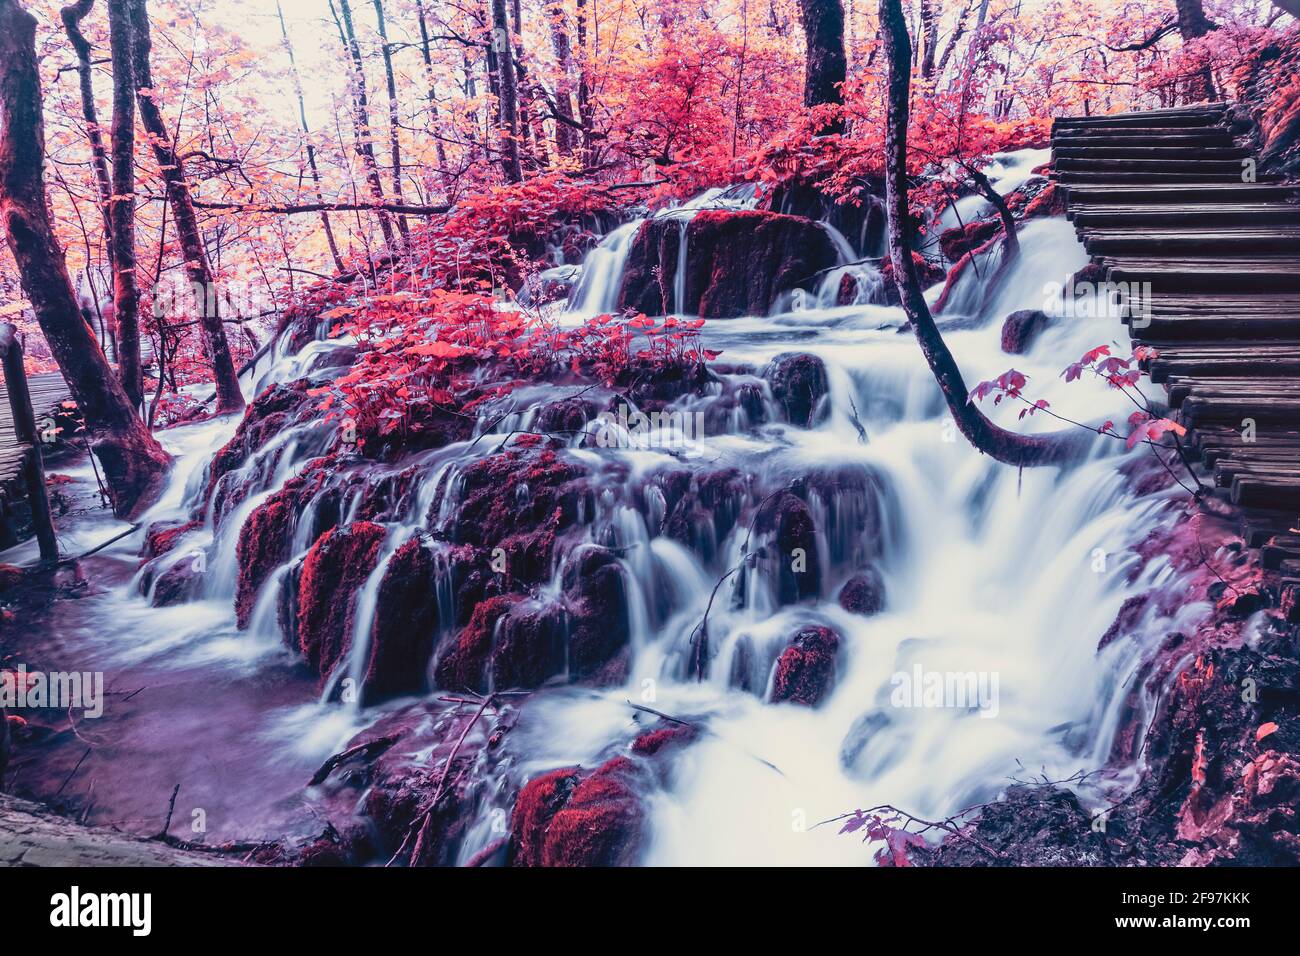 A lot of water, red leaves and breathtaking nature in Plitvice Lakes National Park in Croatia. Picture is color manipulated. Stock Photo